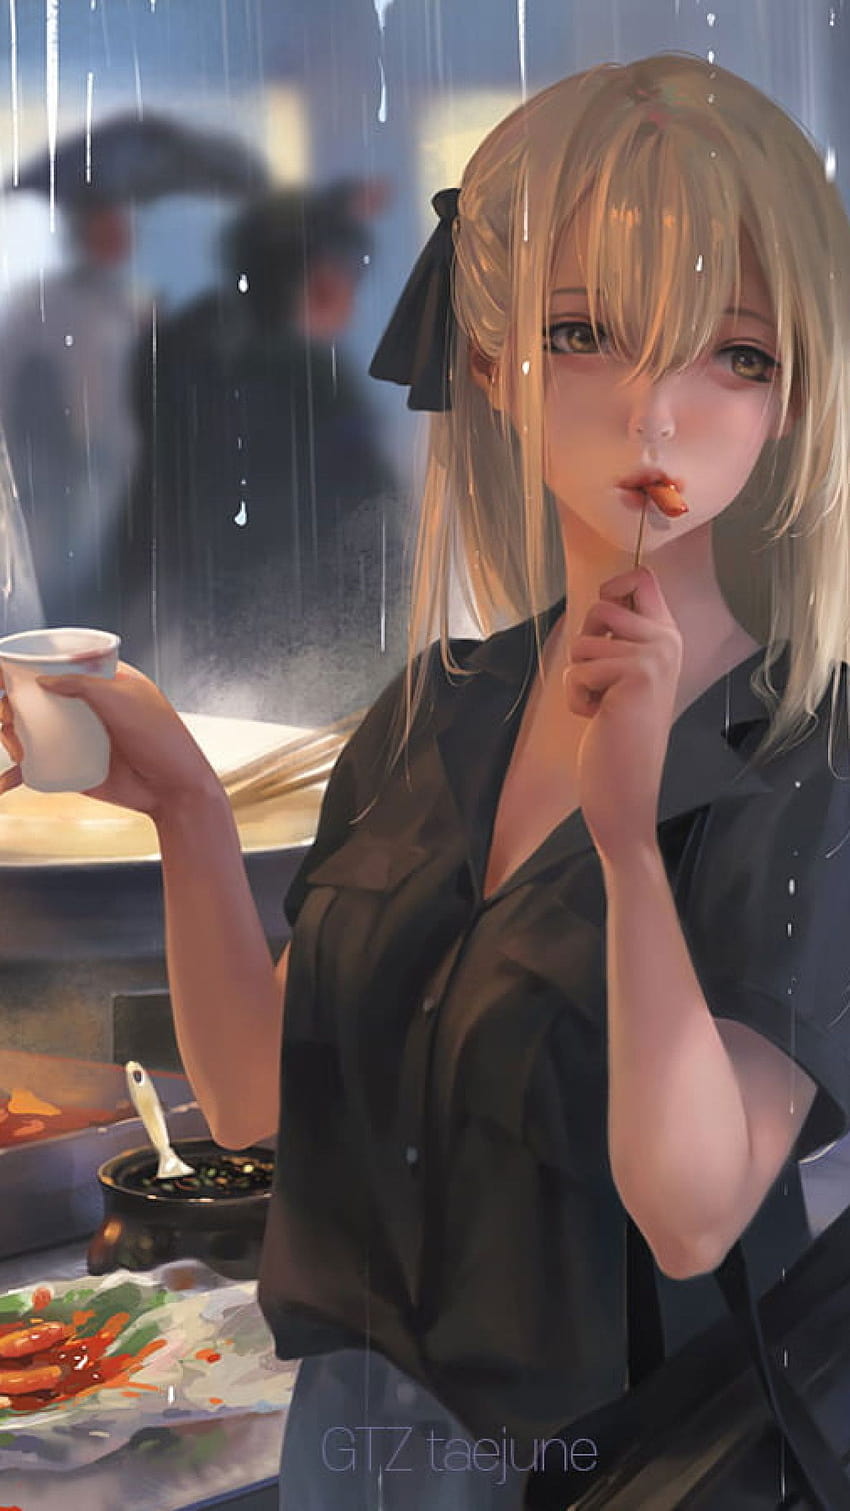 4566675 headphones anime girls original characters blonde open mouth  long hair anime women  Rare Gallery HD Wallpapers